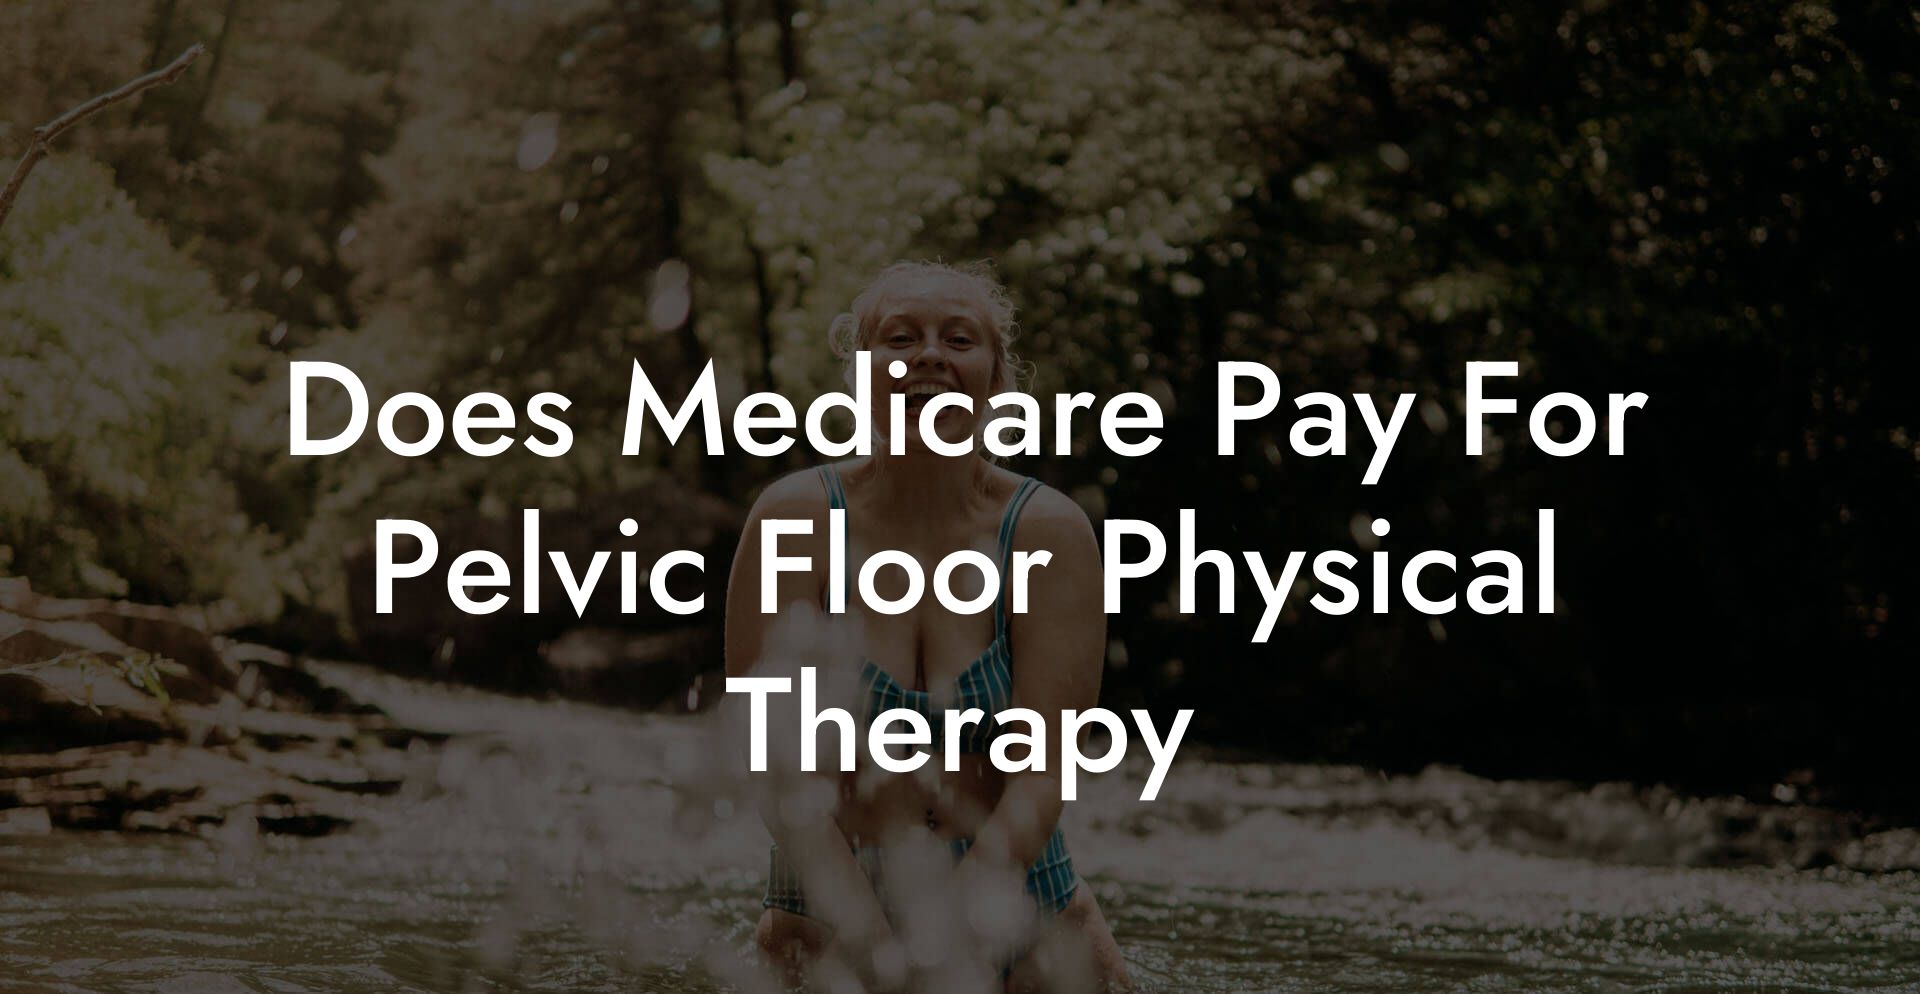 Does Medicare Pay For Pelvic Floor Physical Therapy?